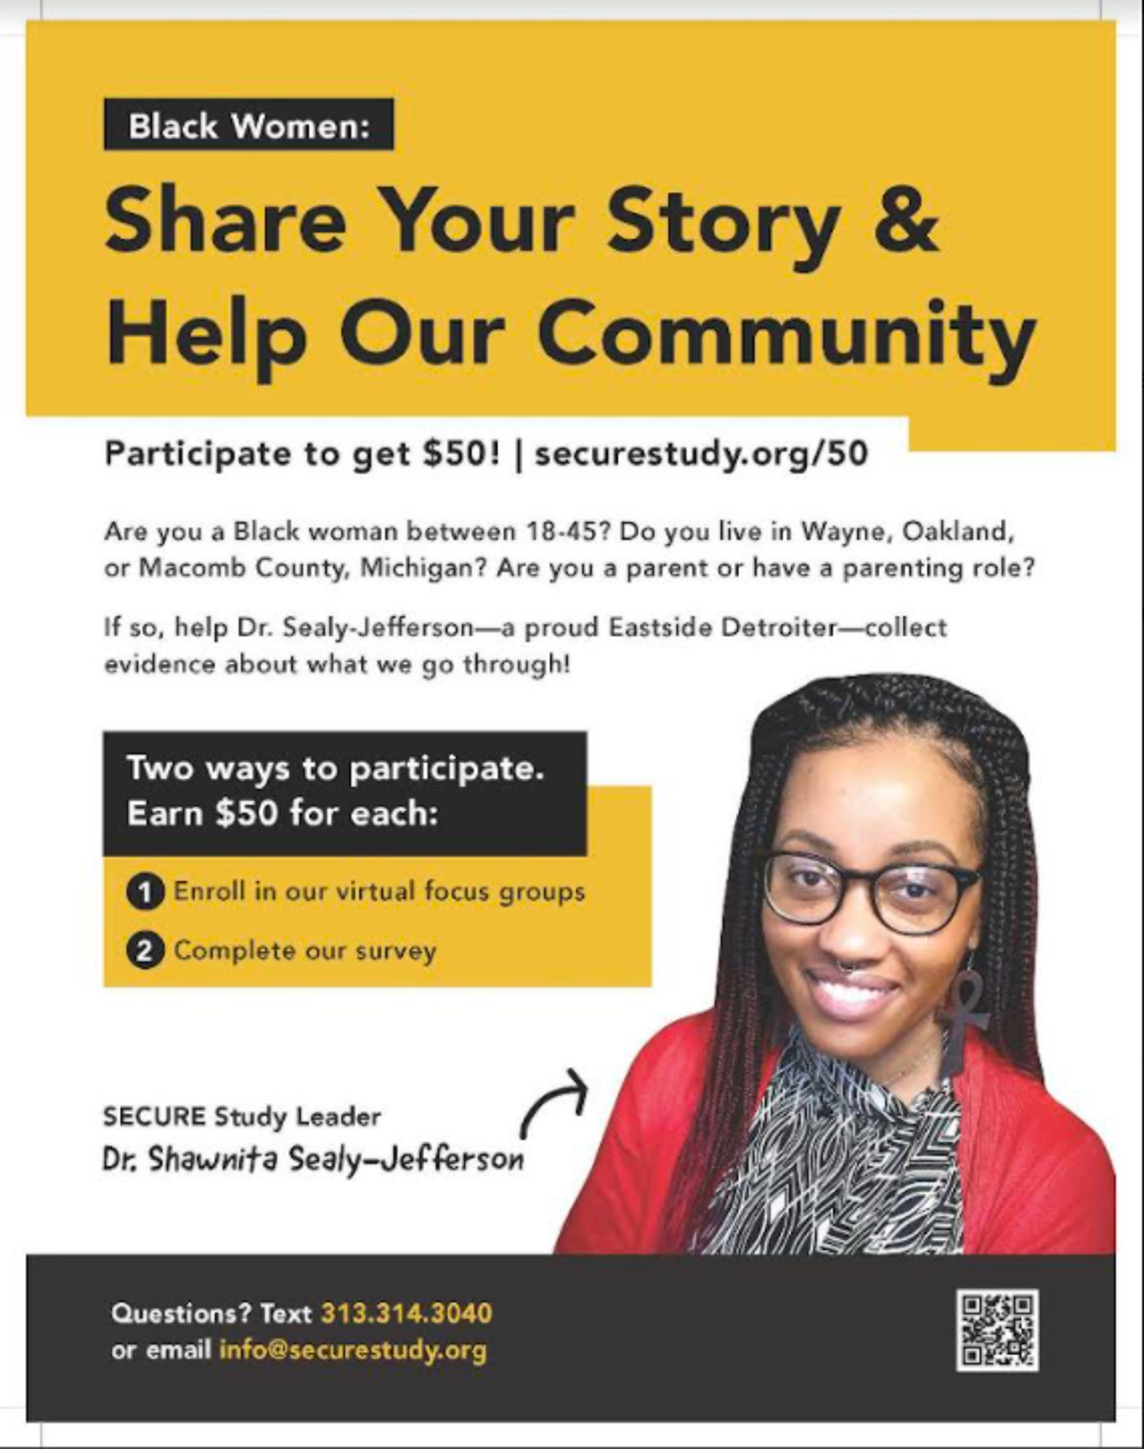 Black Women: Share your Story and Help the Community